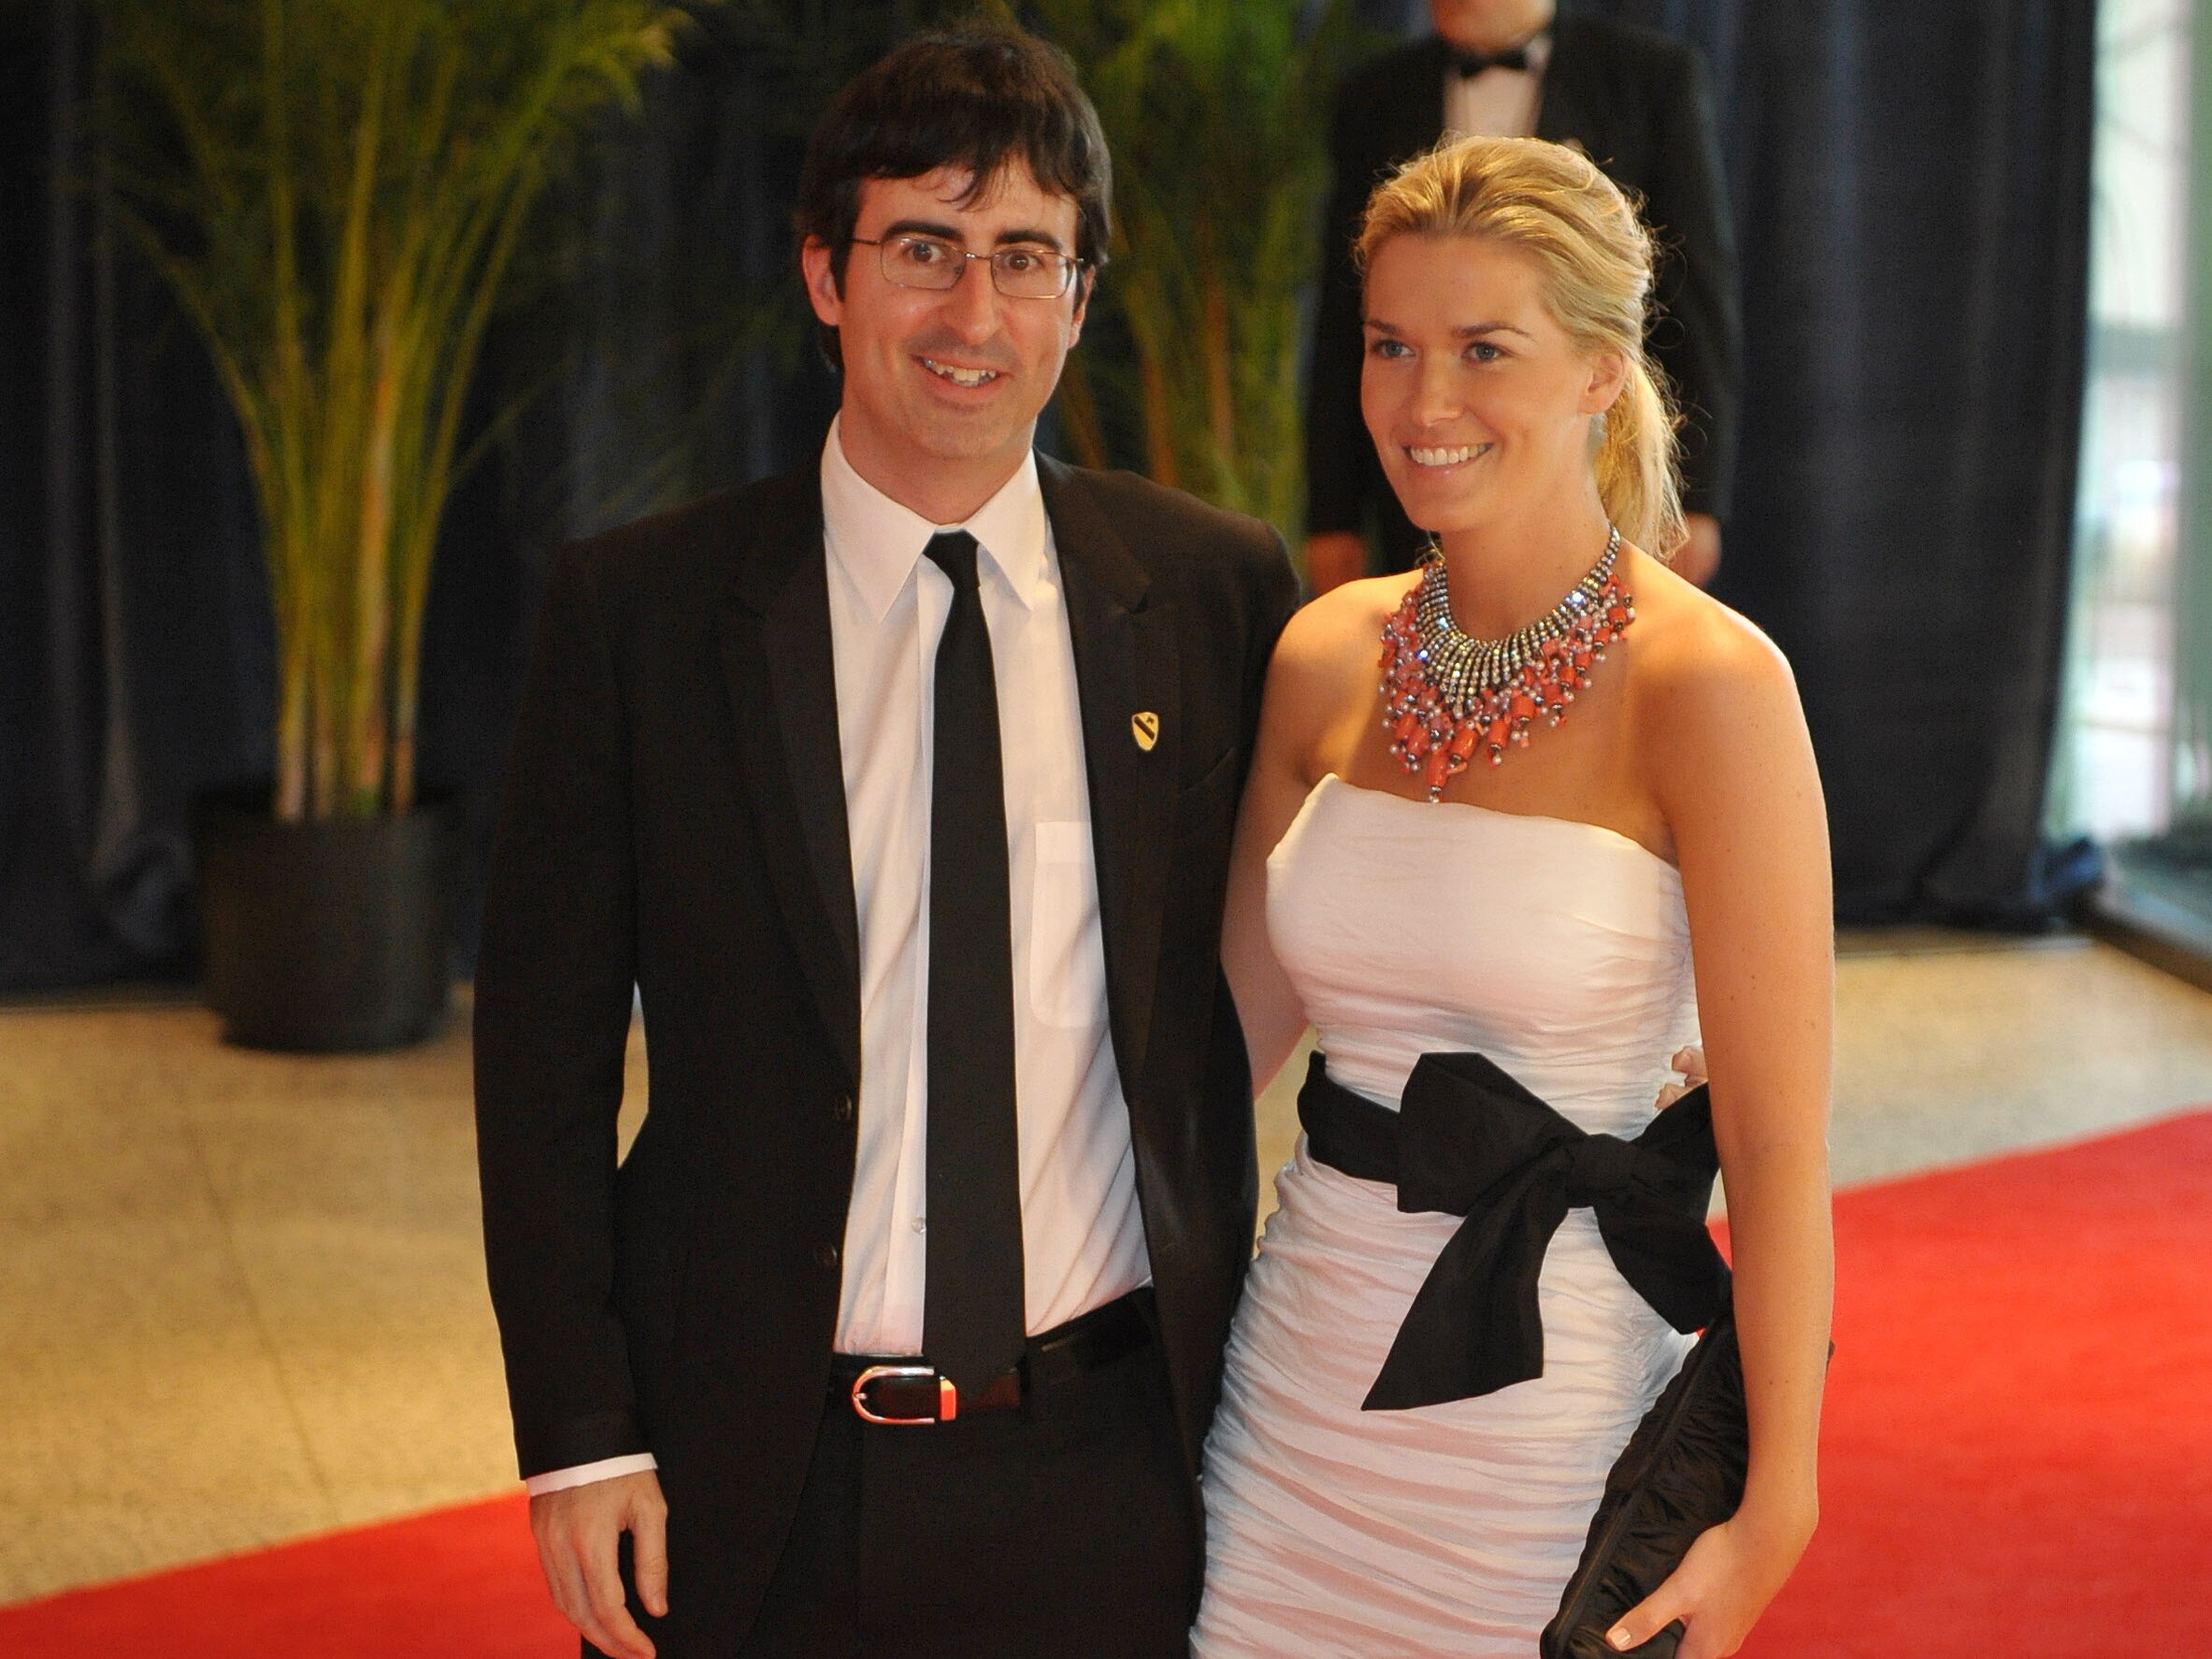 John Oliver (L) in black suit and tie with Kate Norley, who is in a white dress with a black belt